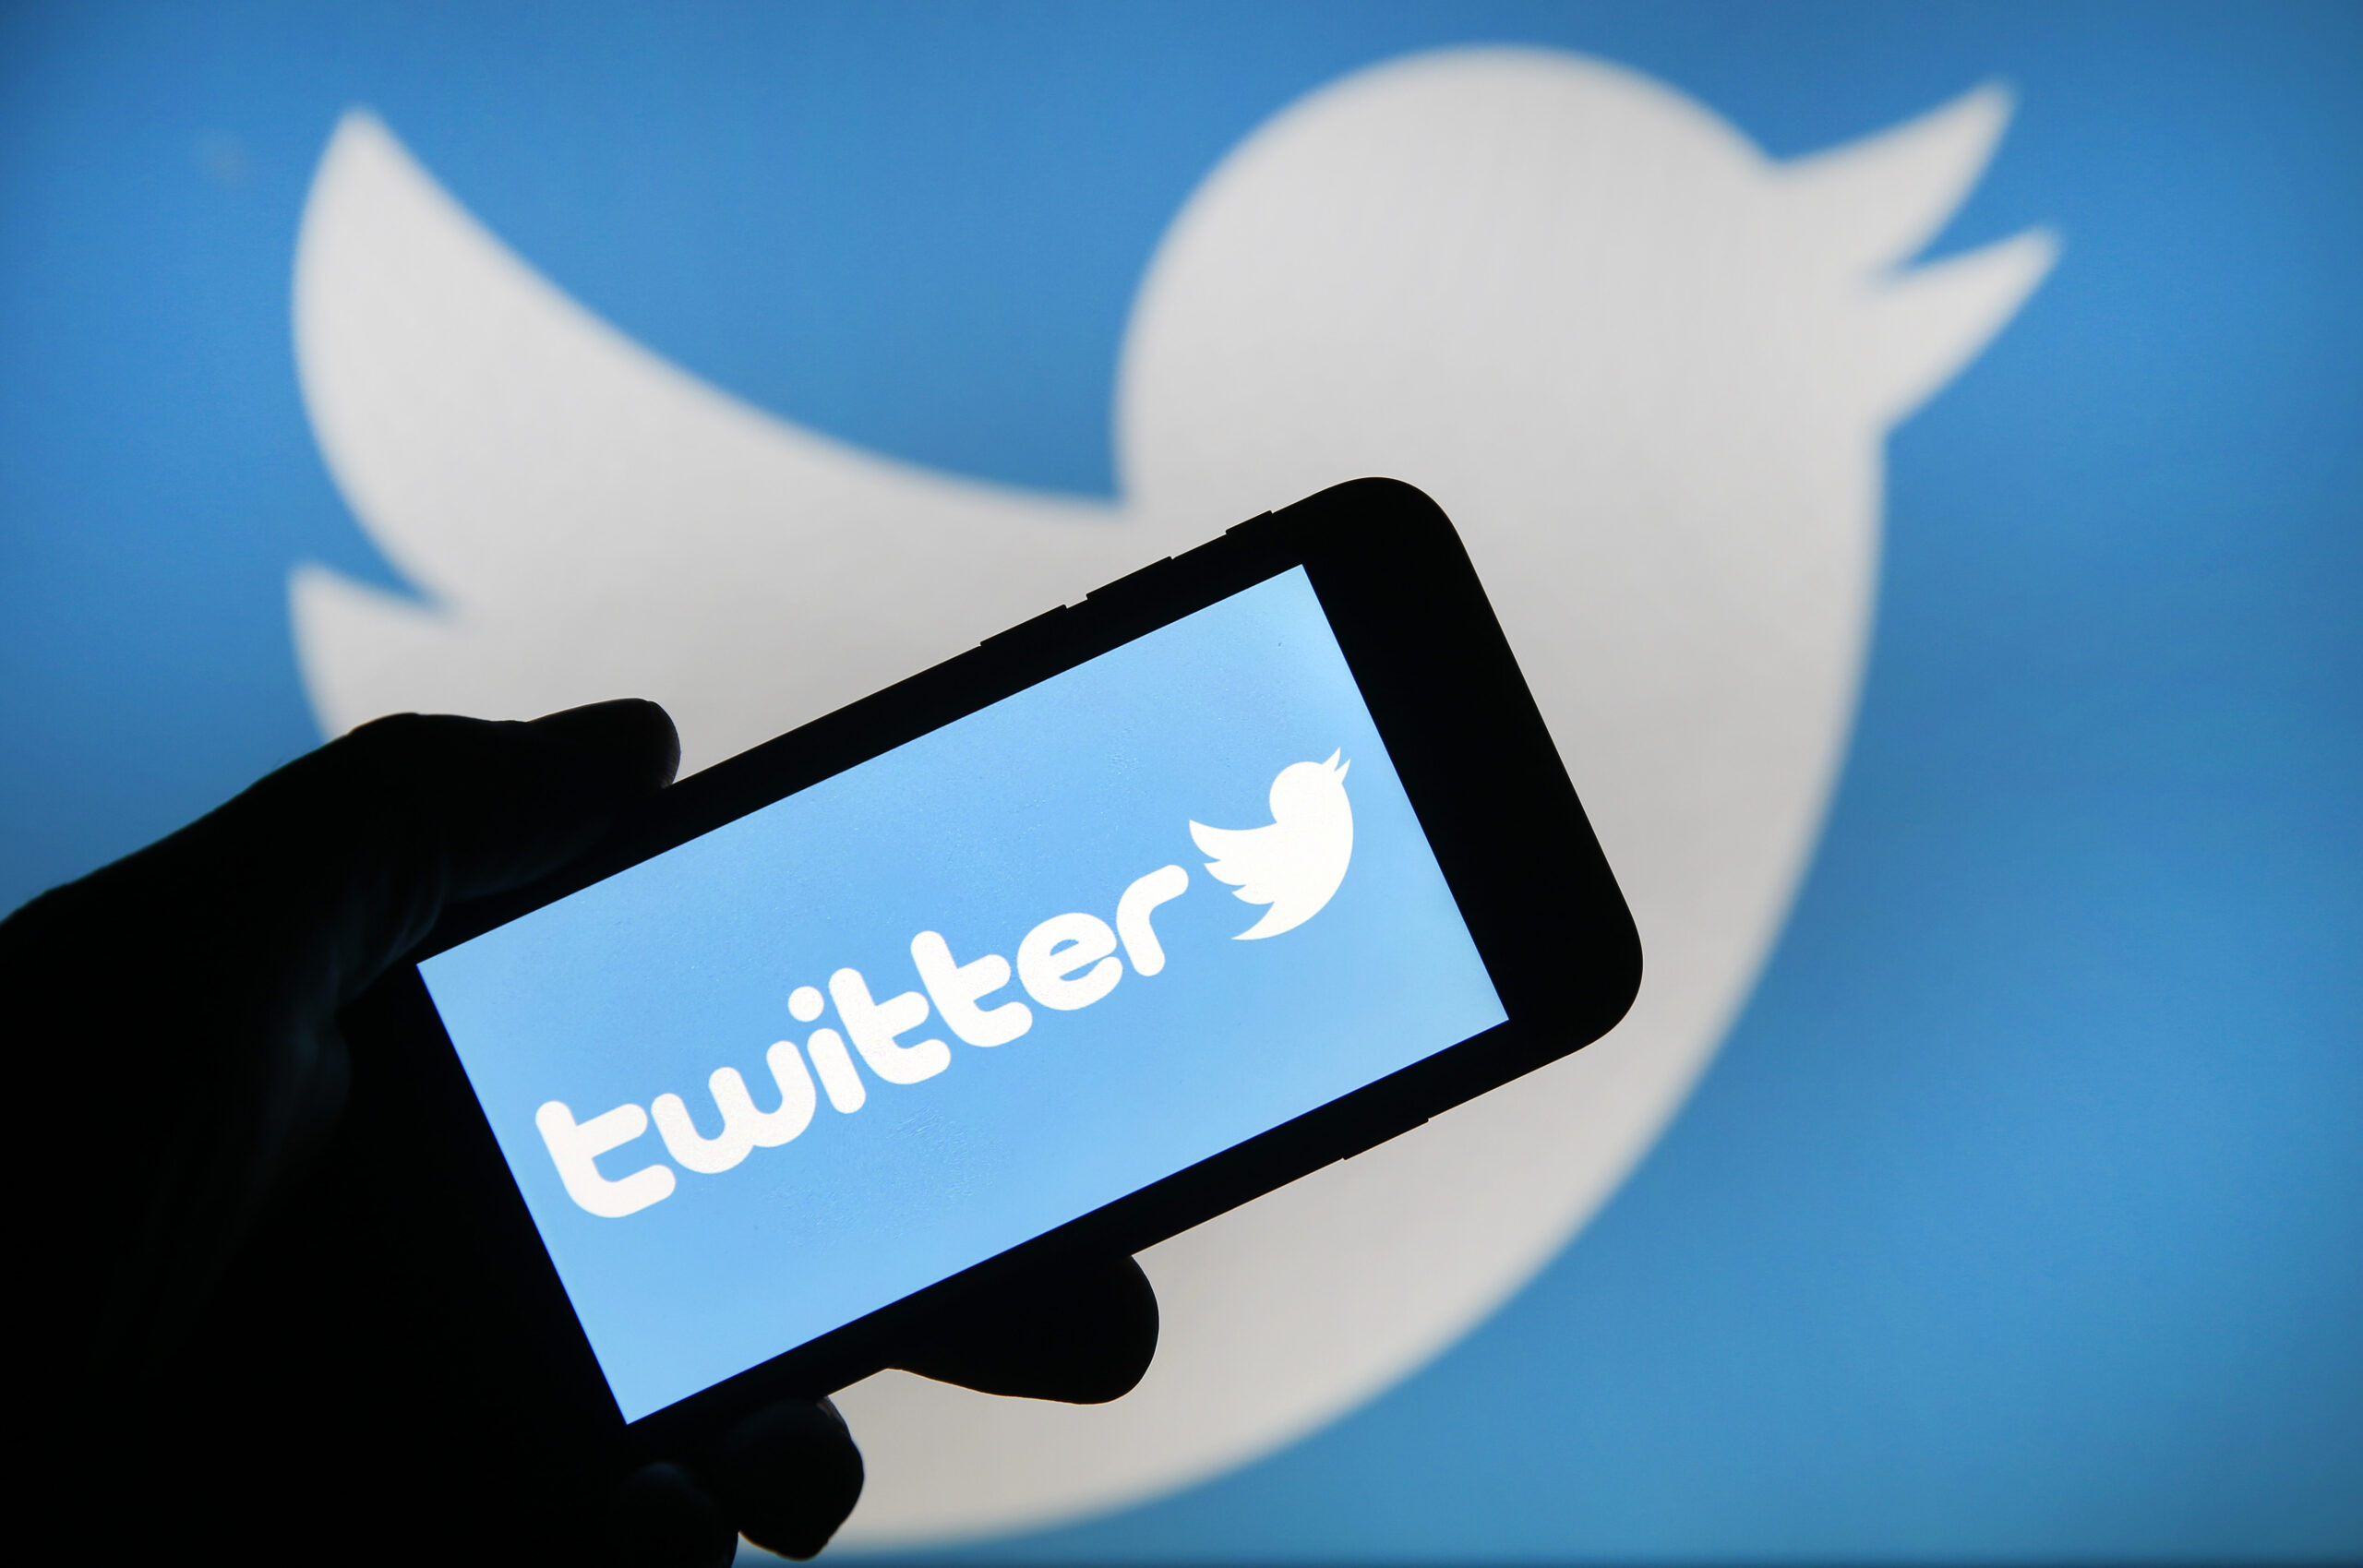 Twitter Cracks Down On Users Who Post Photos Of People Without Consent